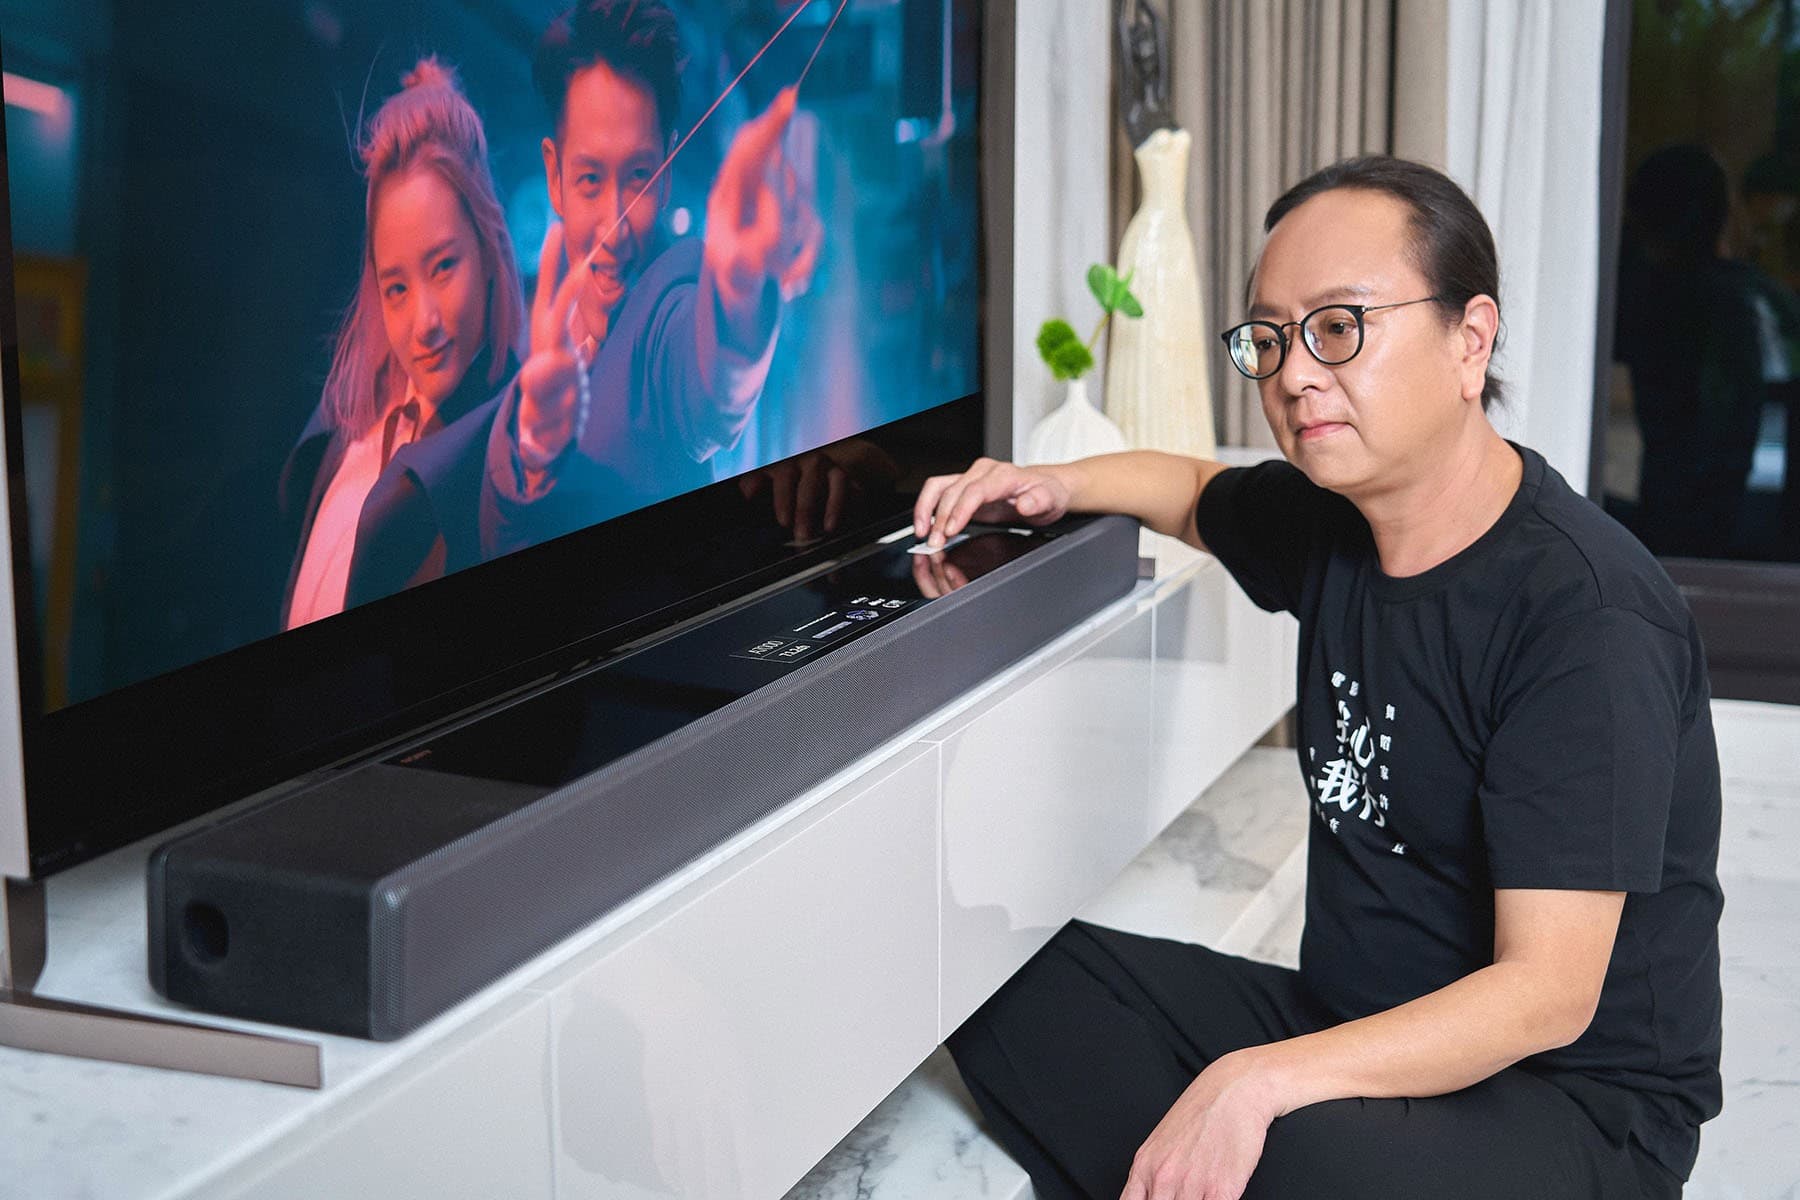 Mr. Zhu has never used a surround sound system in the form of a Soundbar before, and he was impressed by the simplicity of its installation and operation.